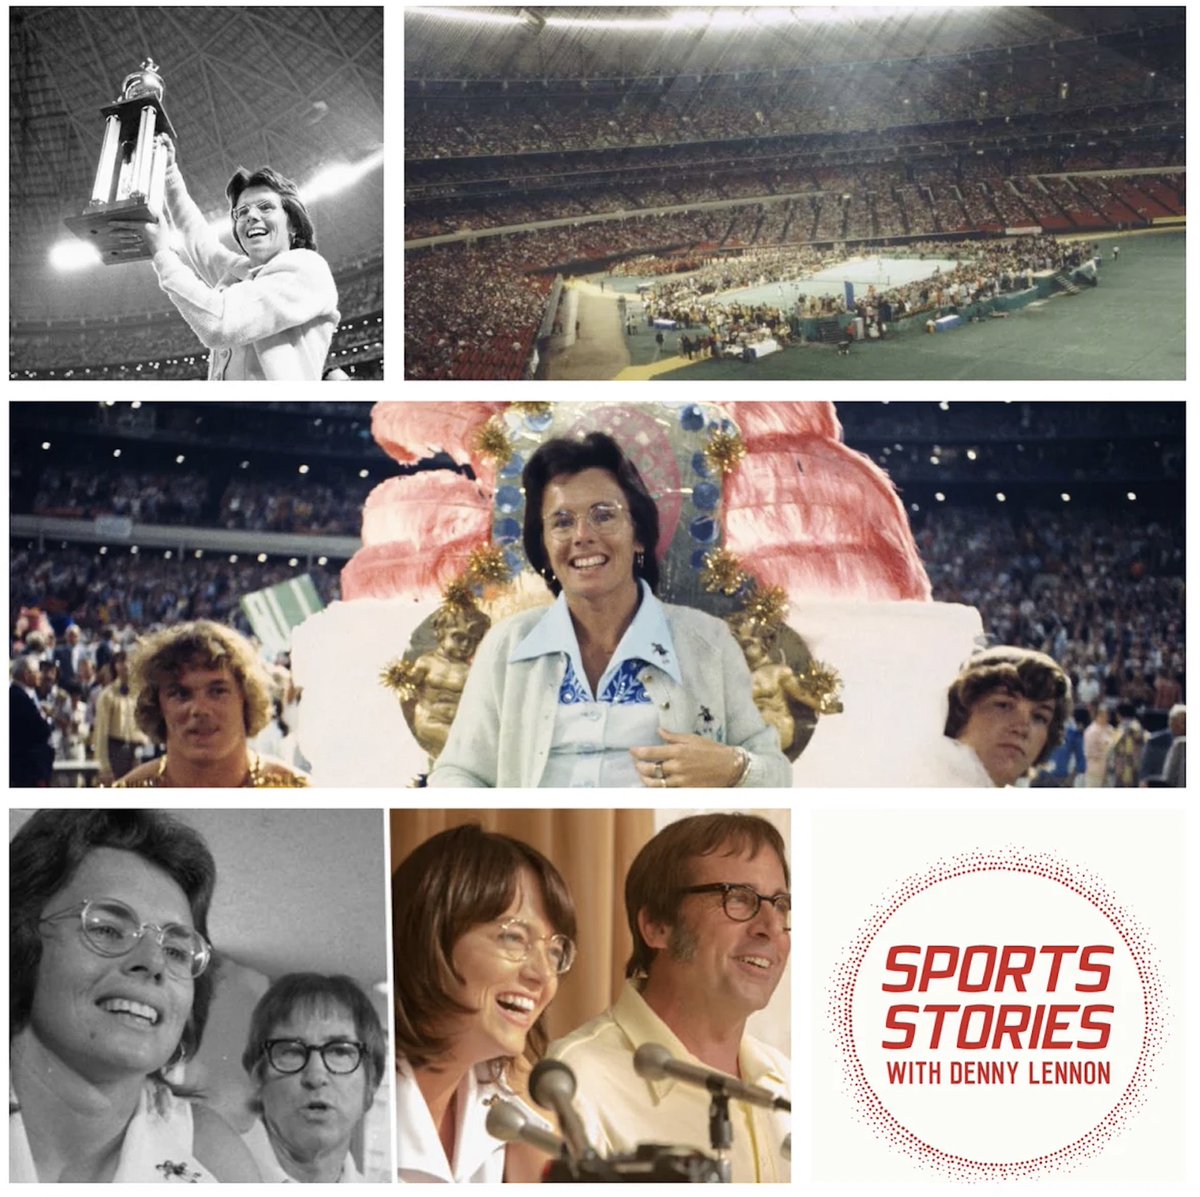 #SSDLHistory - On September 20th in 1973, social rights advocate and tennis pioneer #BillieJeanKing beat #BobbyRiggs in straight sets to win the 'Battle of the Sexes' and the $100,000 winner-take-all purse at the Astrodome in Houston, TX.